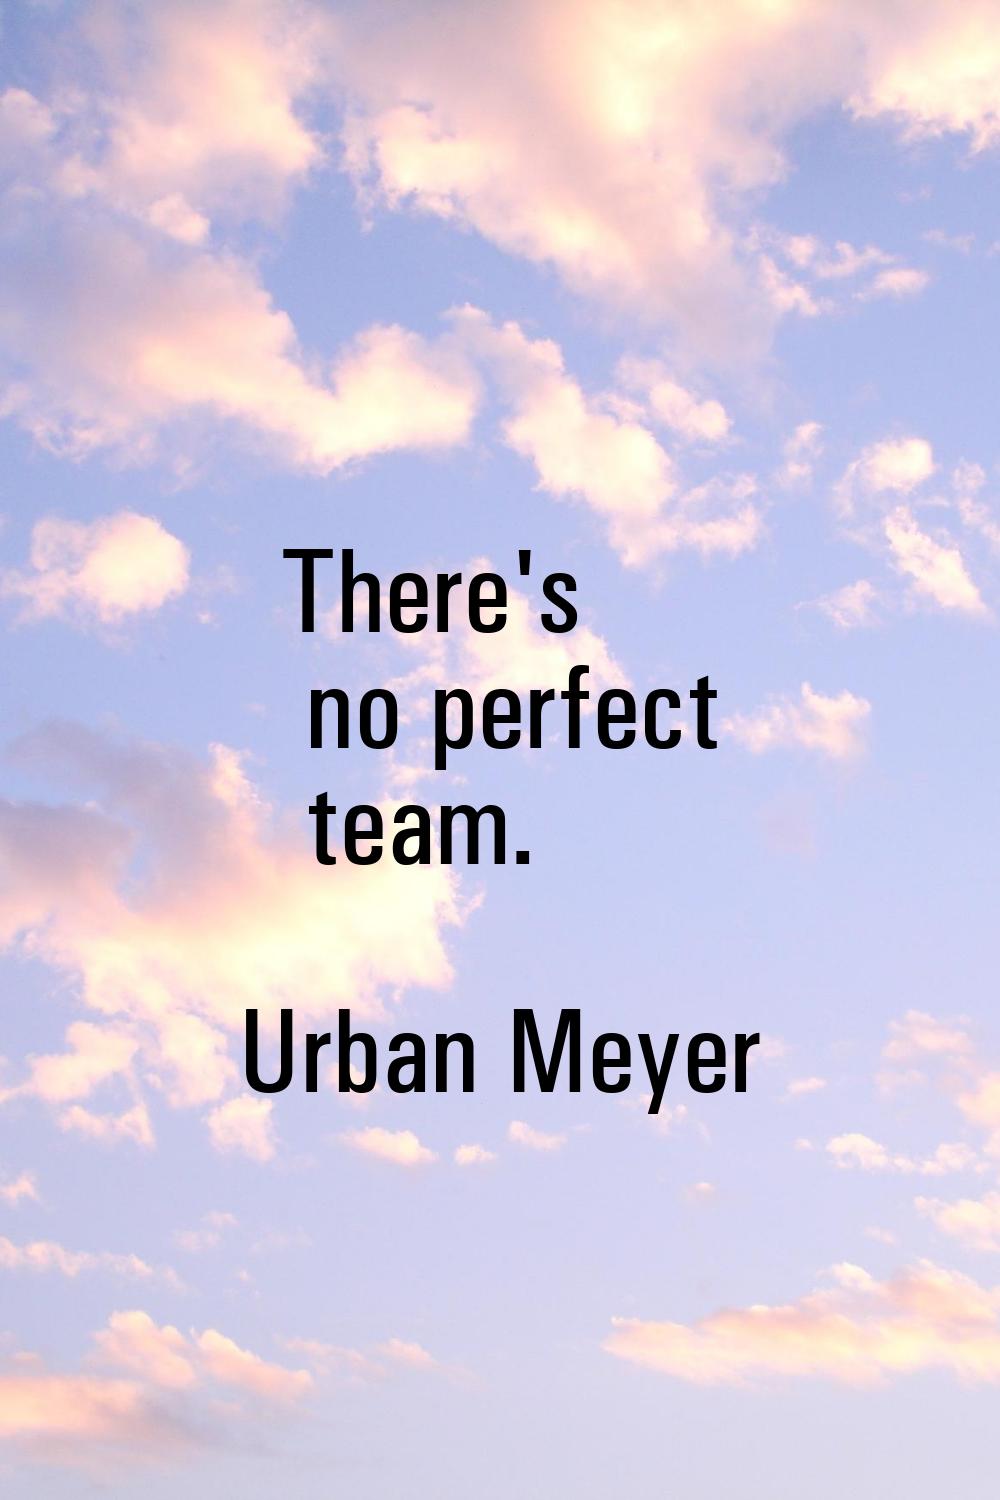 There's no perfect team.